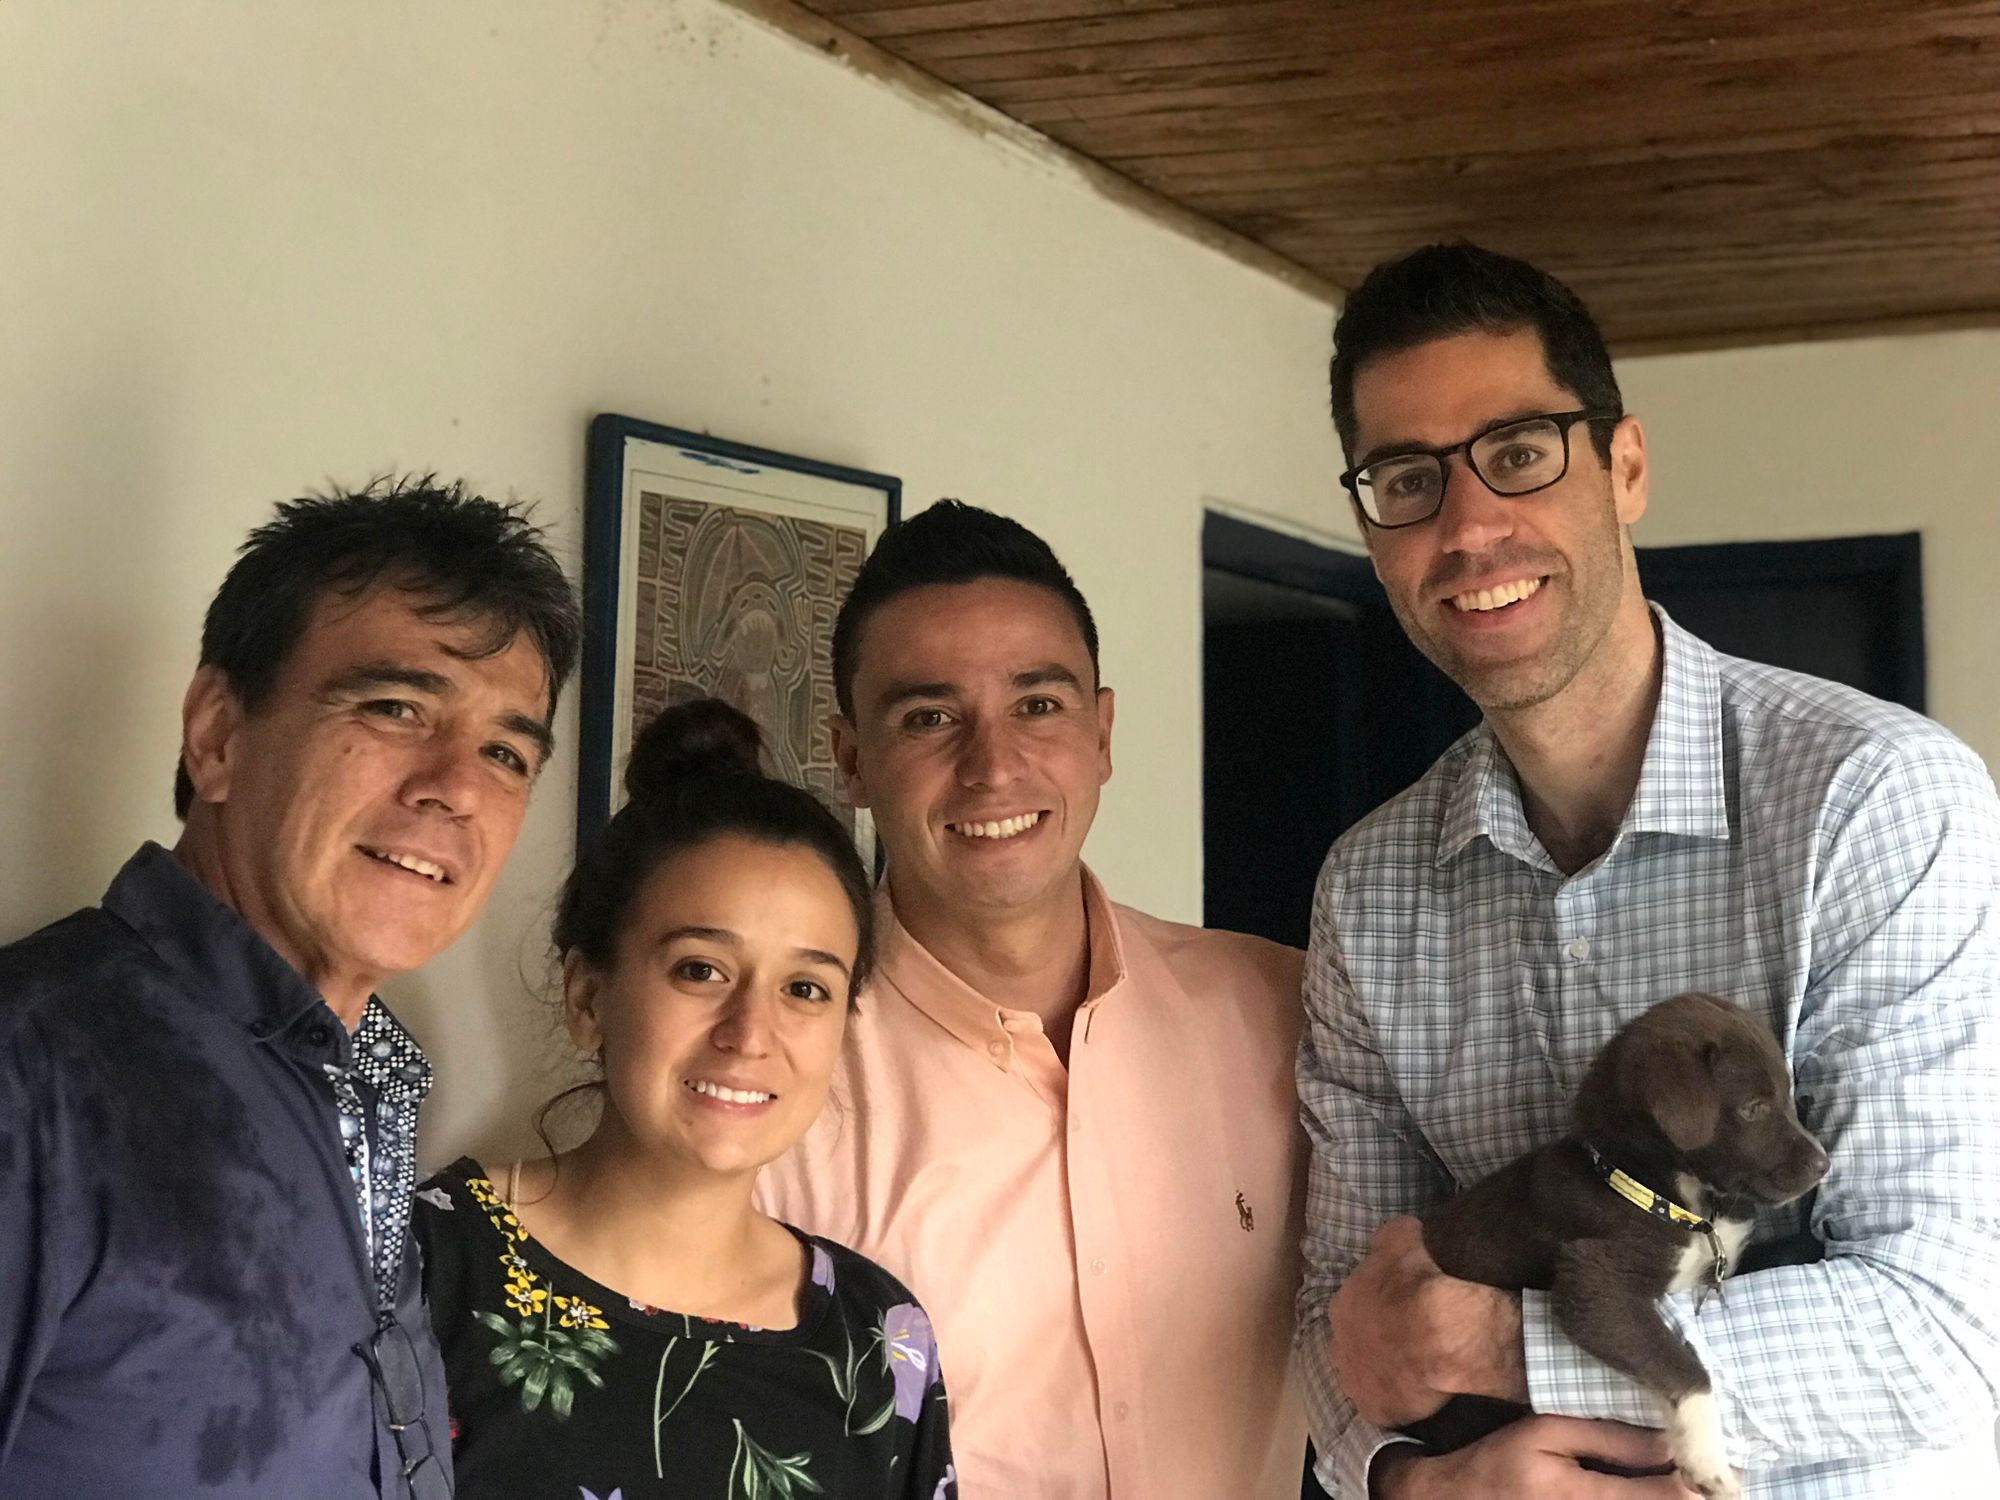 What does a Colombia bully stick supplier trip look like? (March 2019)